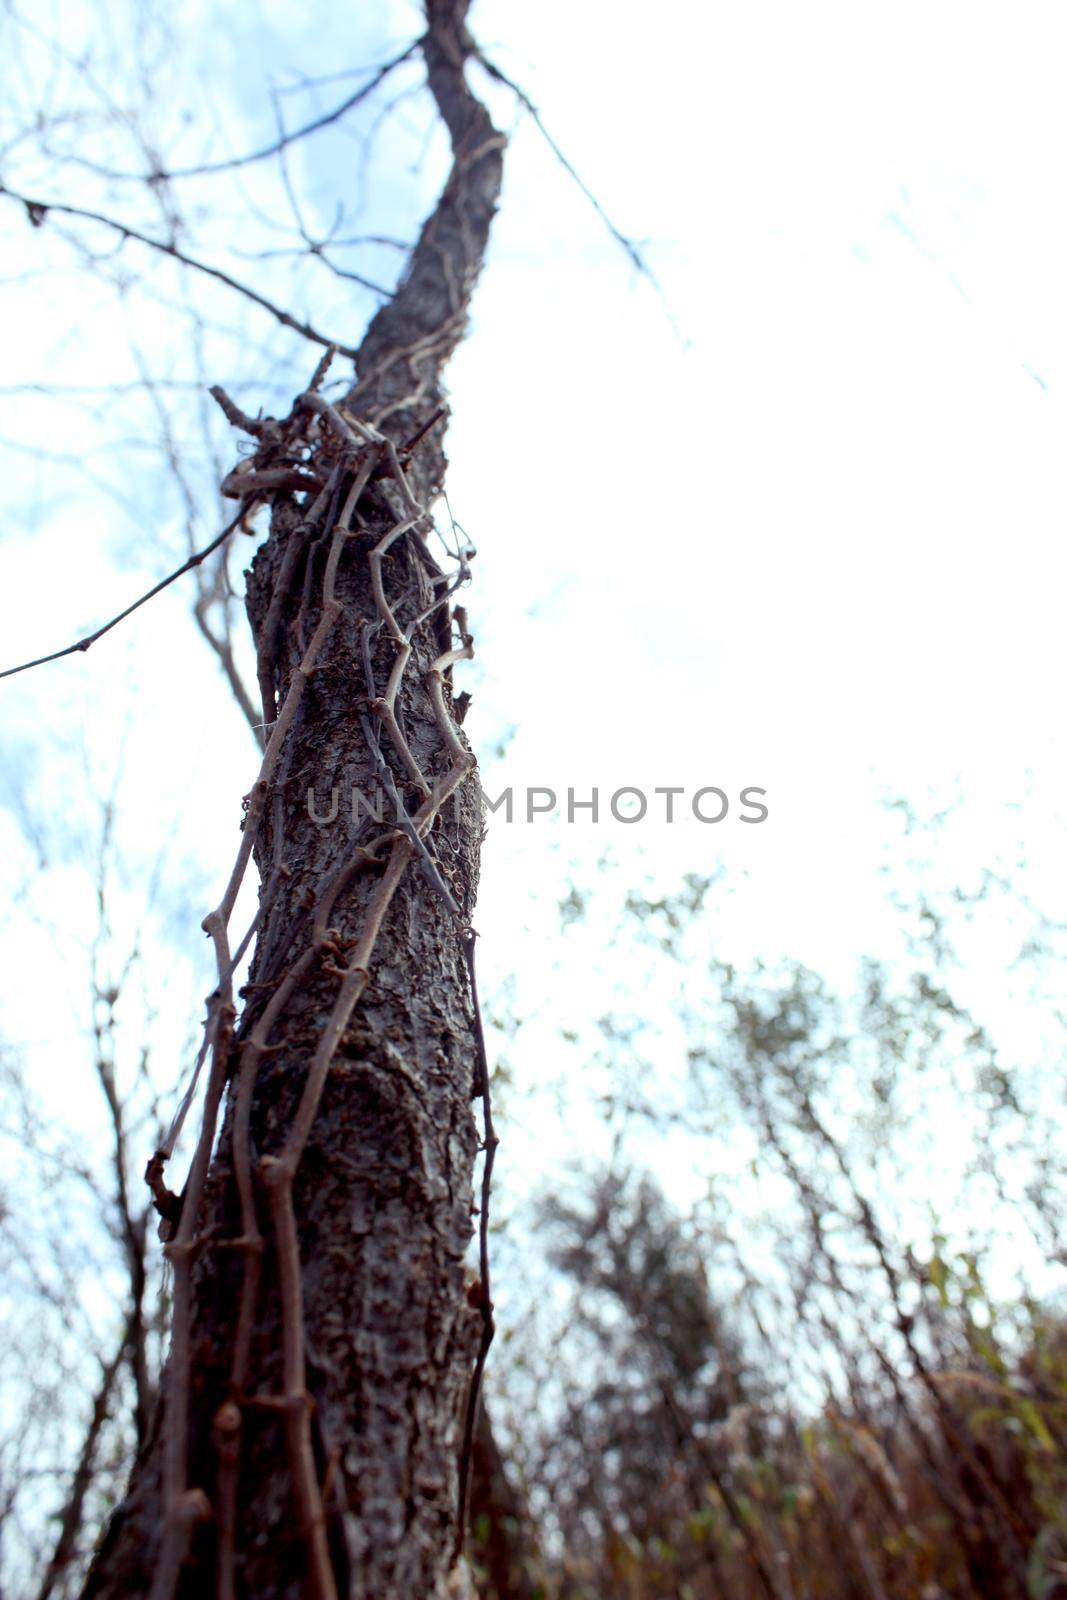 Image of Tree trunk with vines growing up its length stretches to the sky